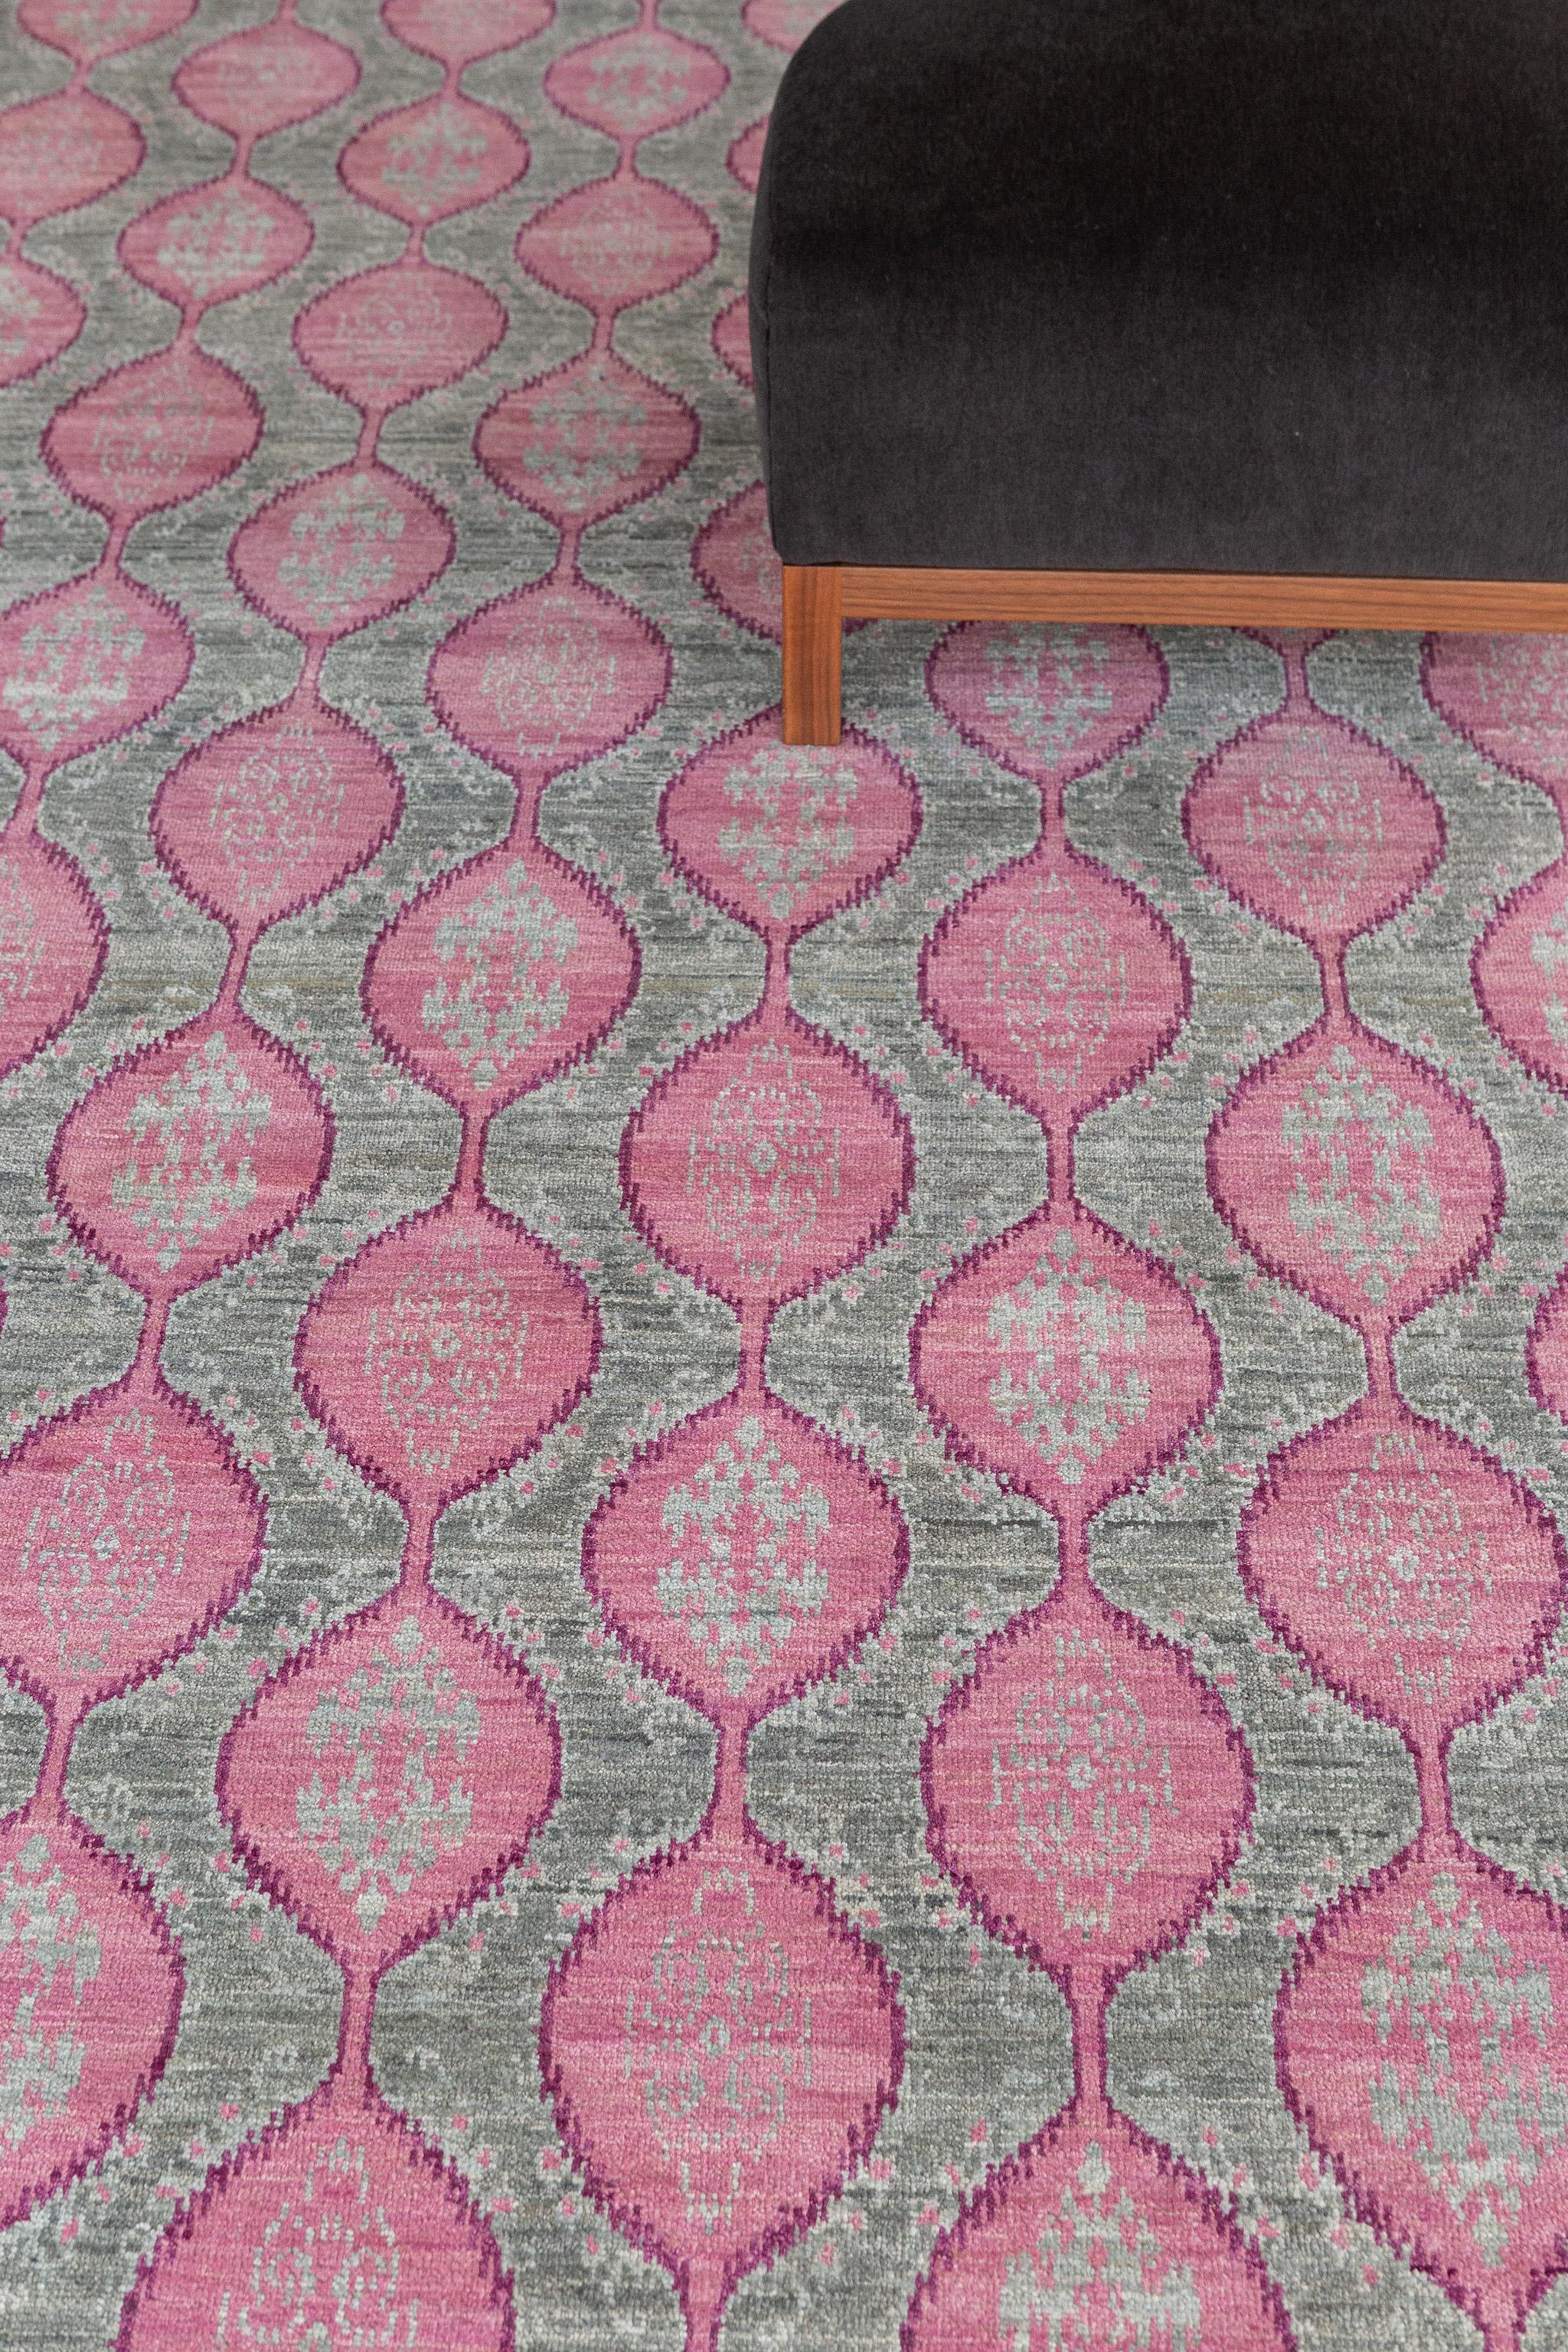 Dantelle' is a transitional design weaving traditional diamond motifs in a modern day lattice pattern. Beautiful hues of pink and green perfectly complement one another to create a magnificent rug. This piece will elevate and bring character to any